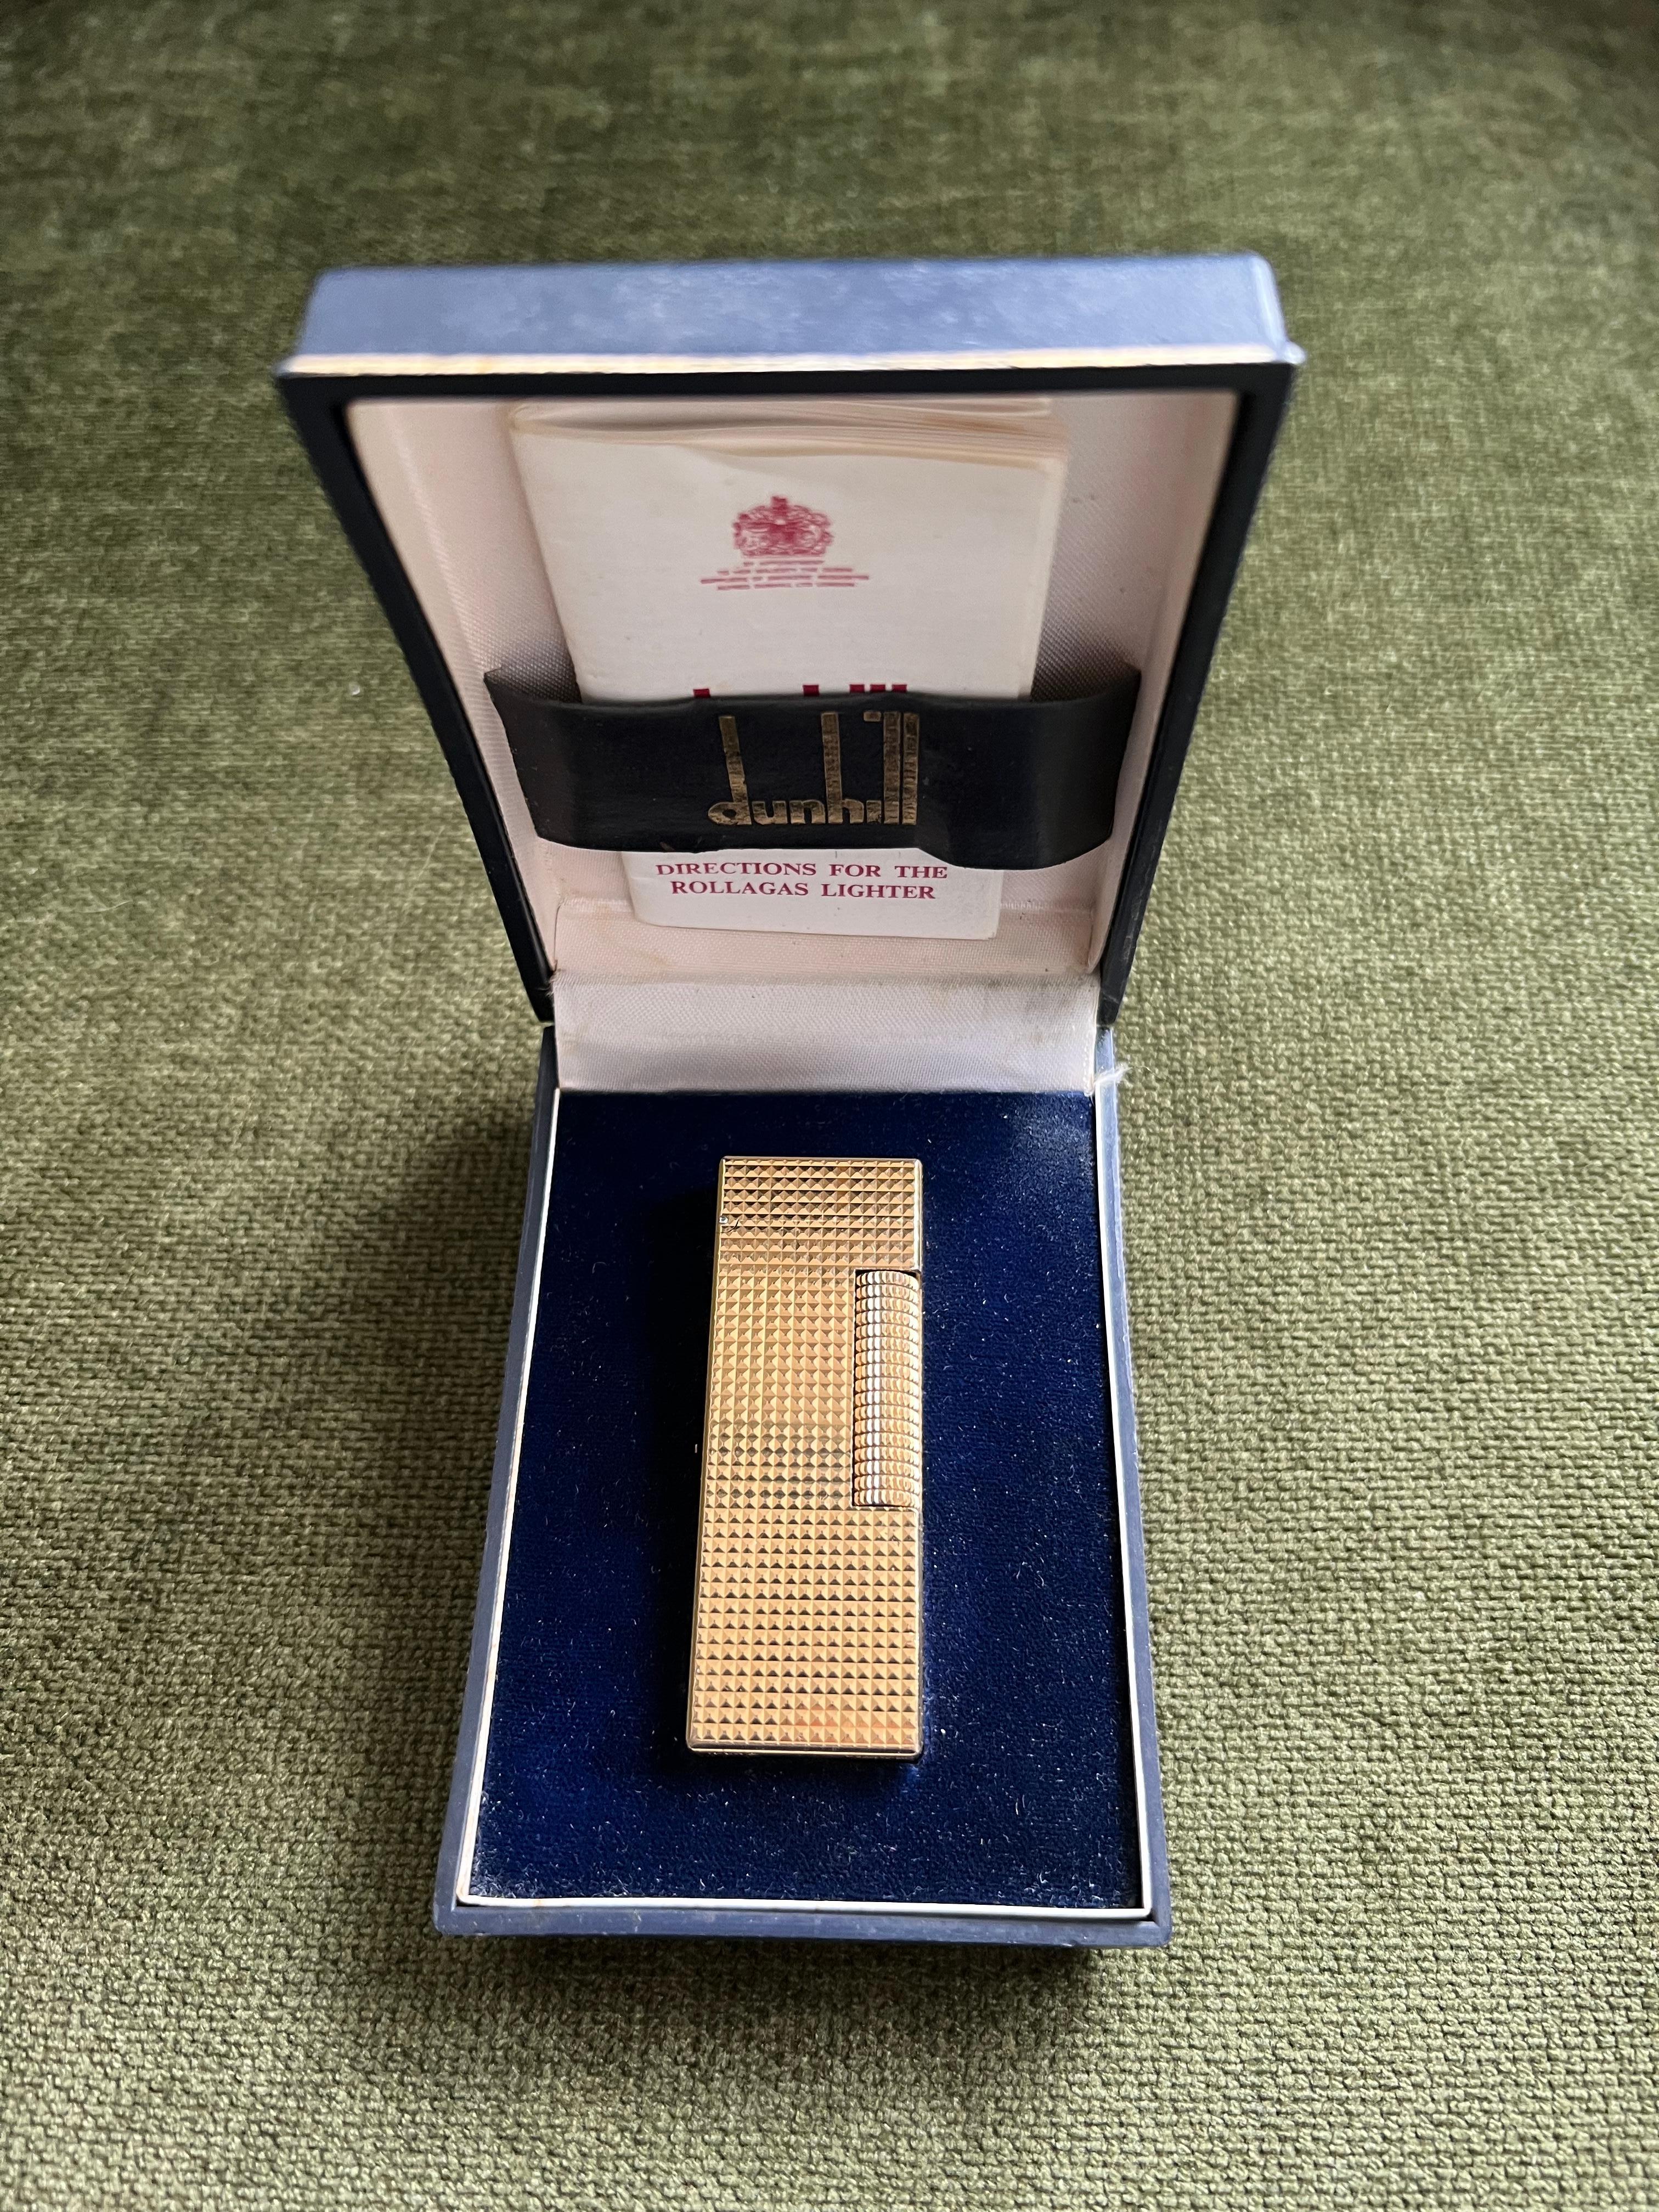 Dunhill “James Bond” Lighter of Choice, Diamond Pattern Gold Plated Lighter
Vintage Dunhill Diamond Pattern Gold Plated Lighter 
Circa 1980
Retro 
In fantastic working condition 
The lighter sparks, ignites and flames 
Built like a tank
All original